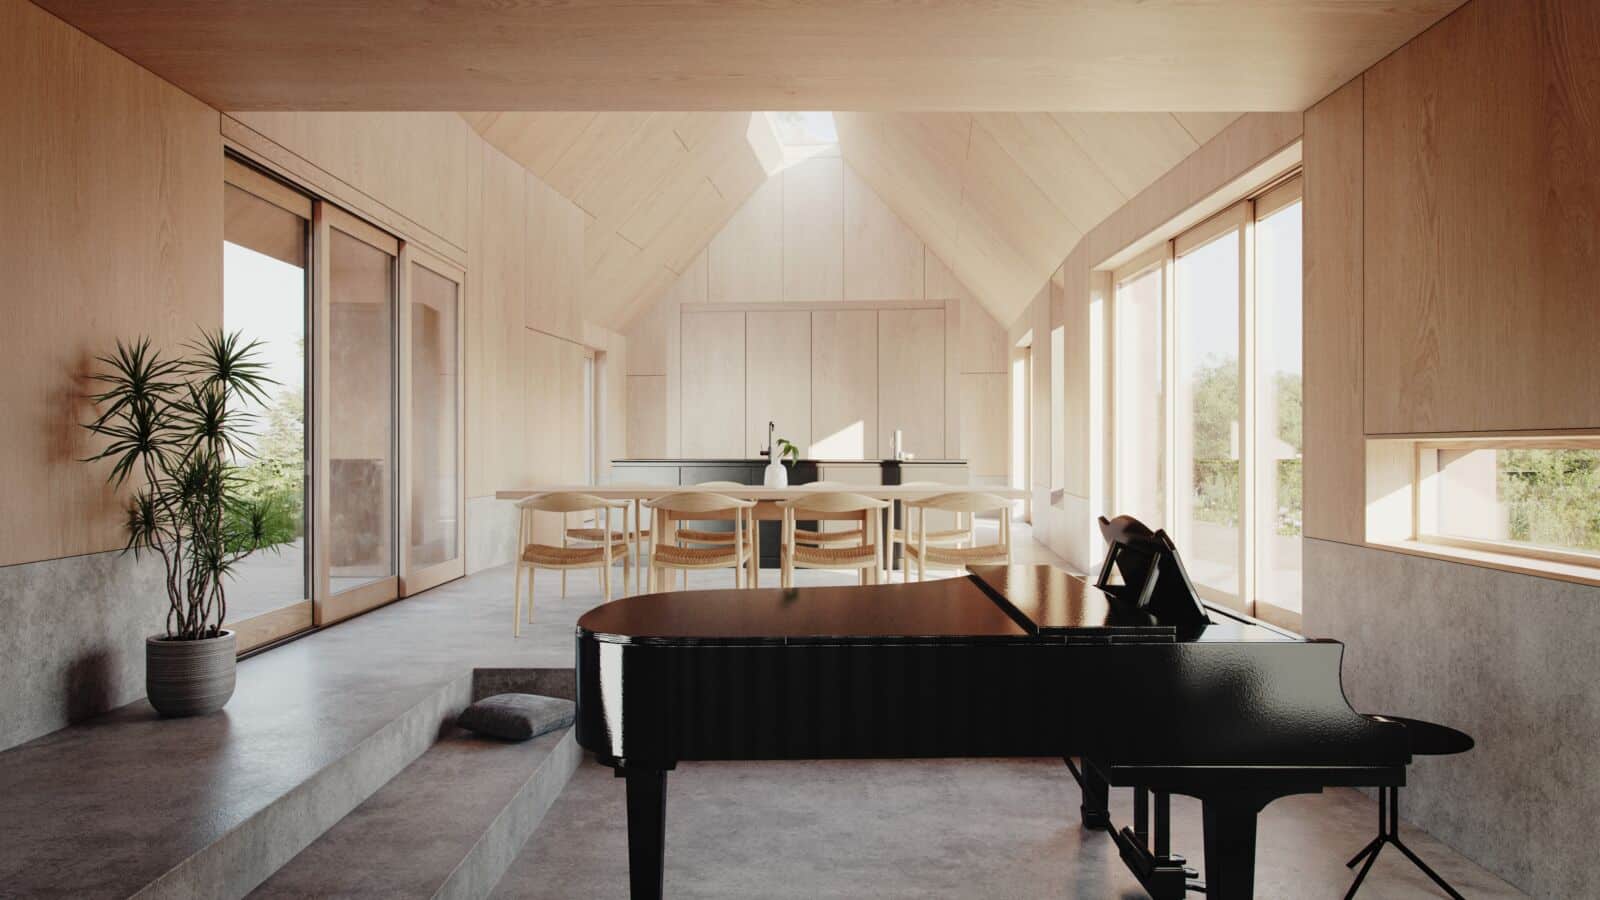 Crafted timber internal, a simple serene material palette of timber and concrete